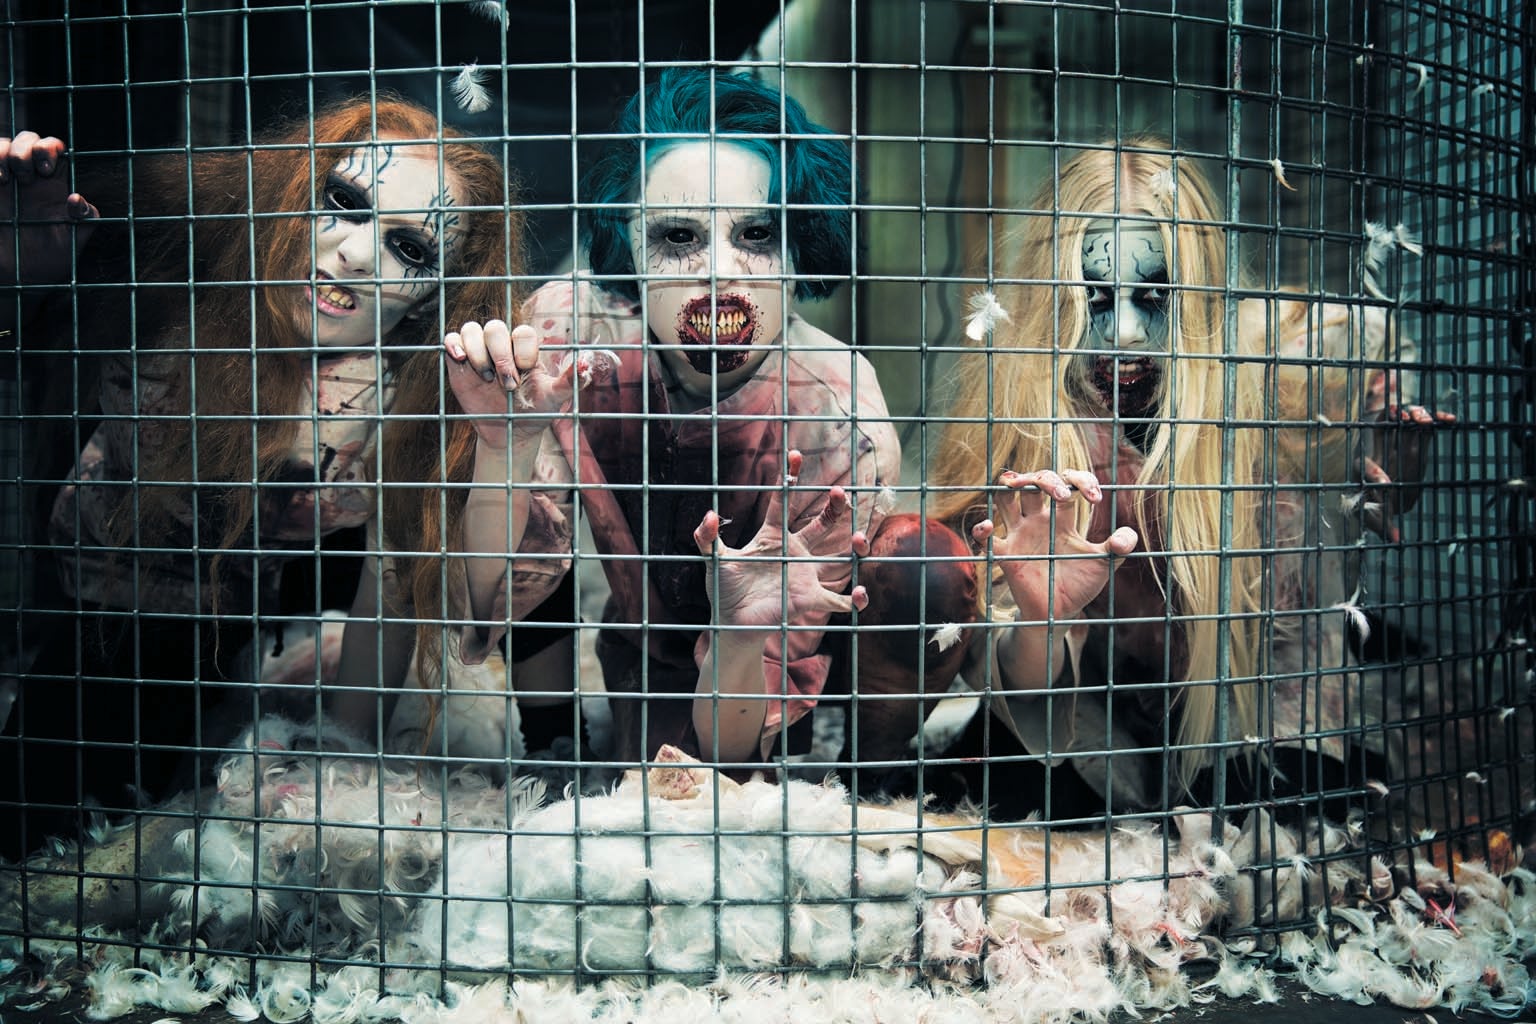 Three people dressed as horror creature with white painted faces and darkened eyes, shown behind a wire fence.